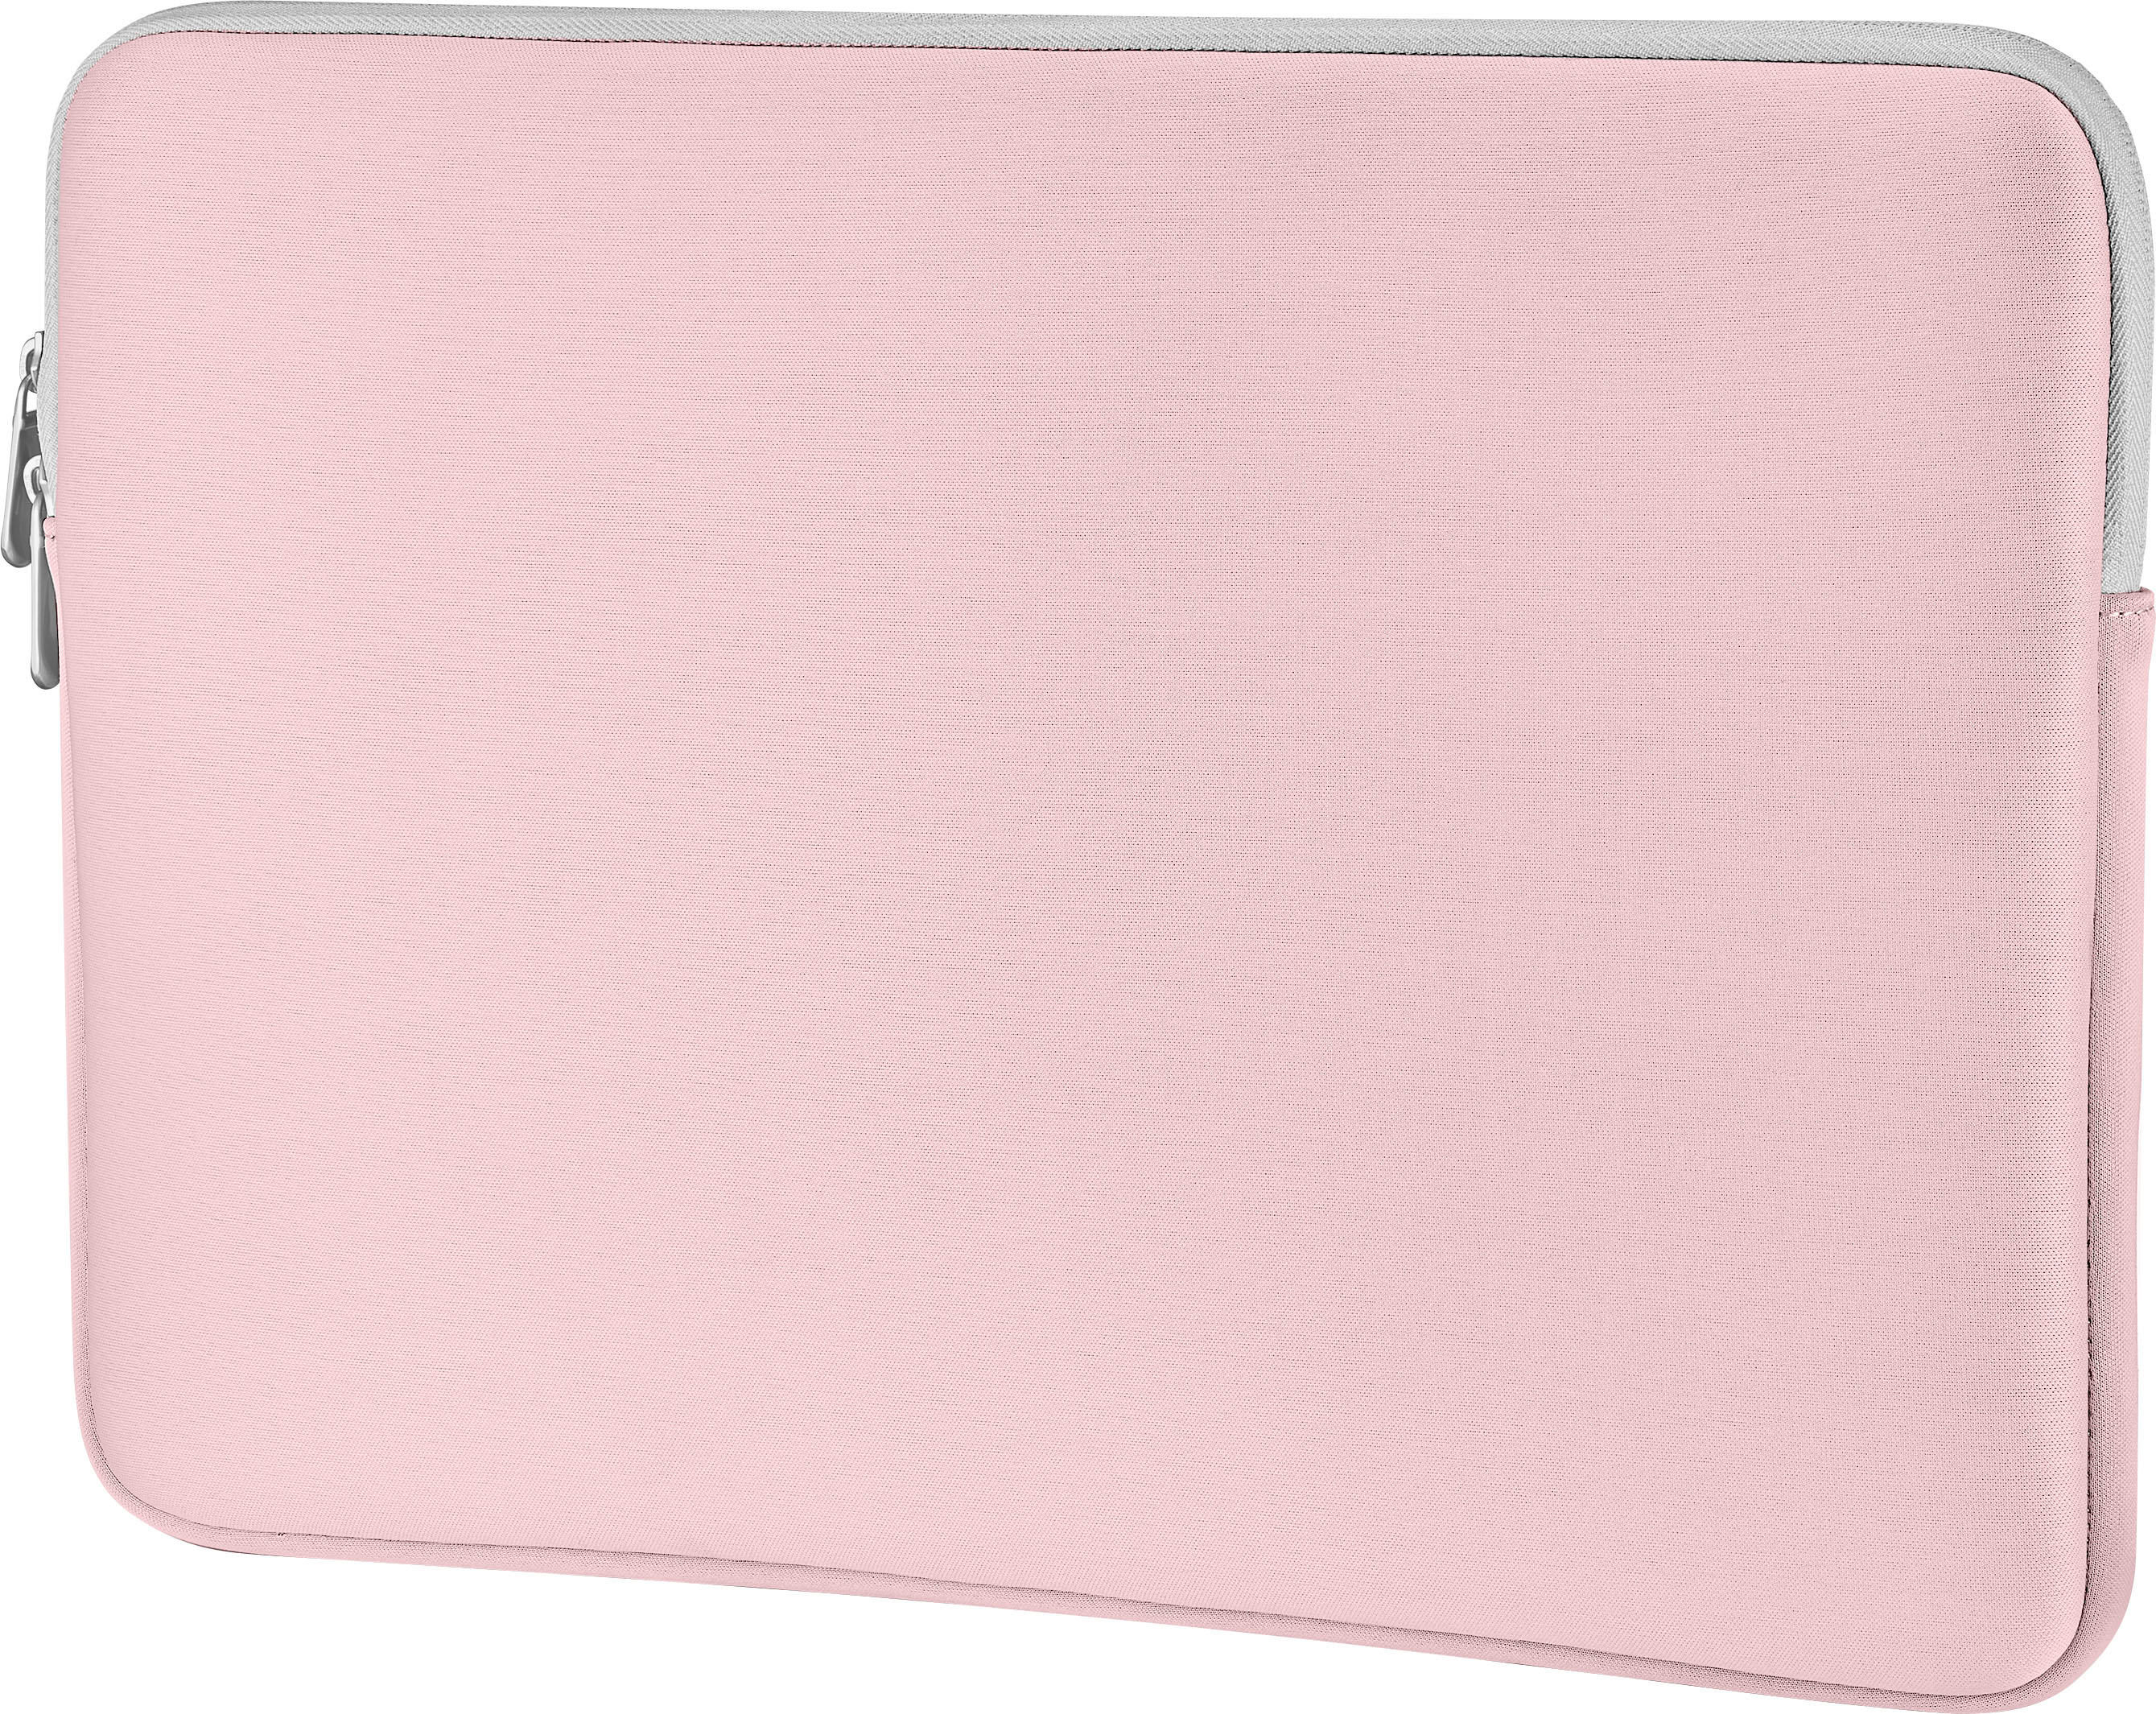 Modal™ Laptop Sleeve for Most Laptops Up to 16” Pink Best Buy